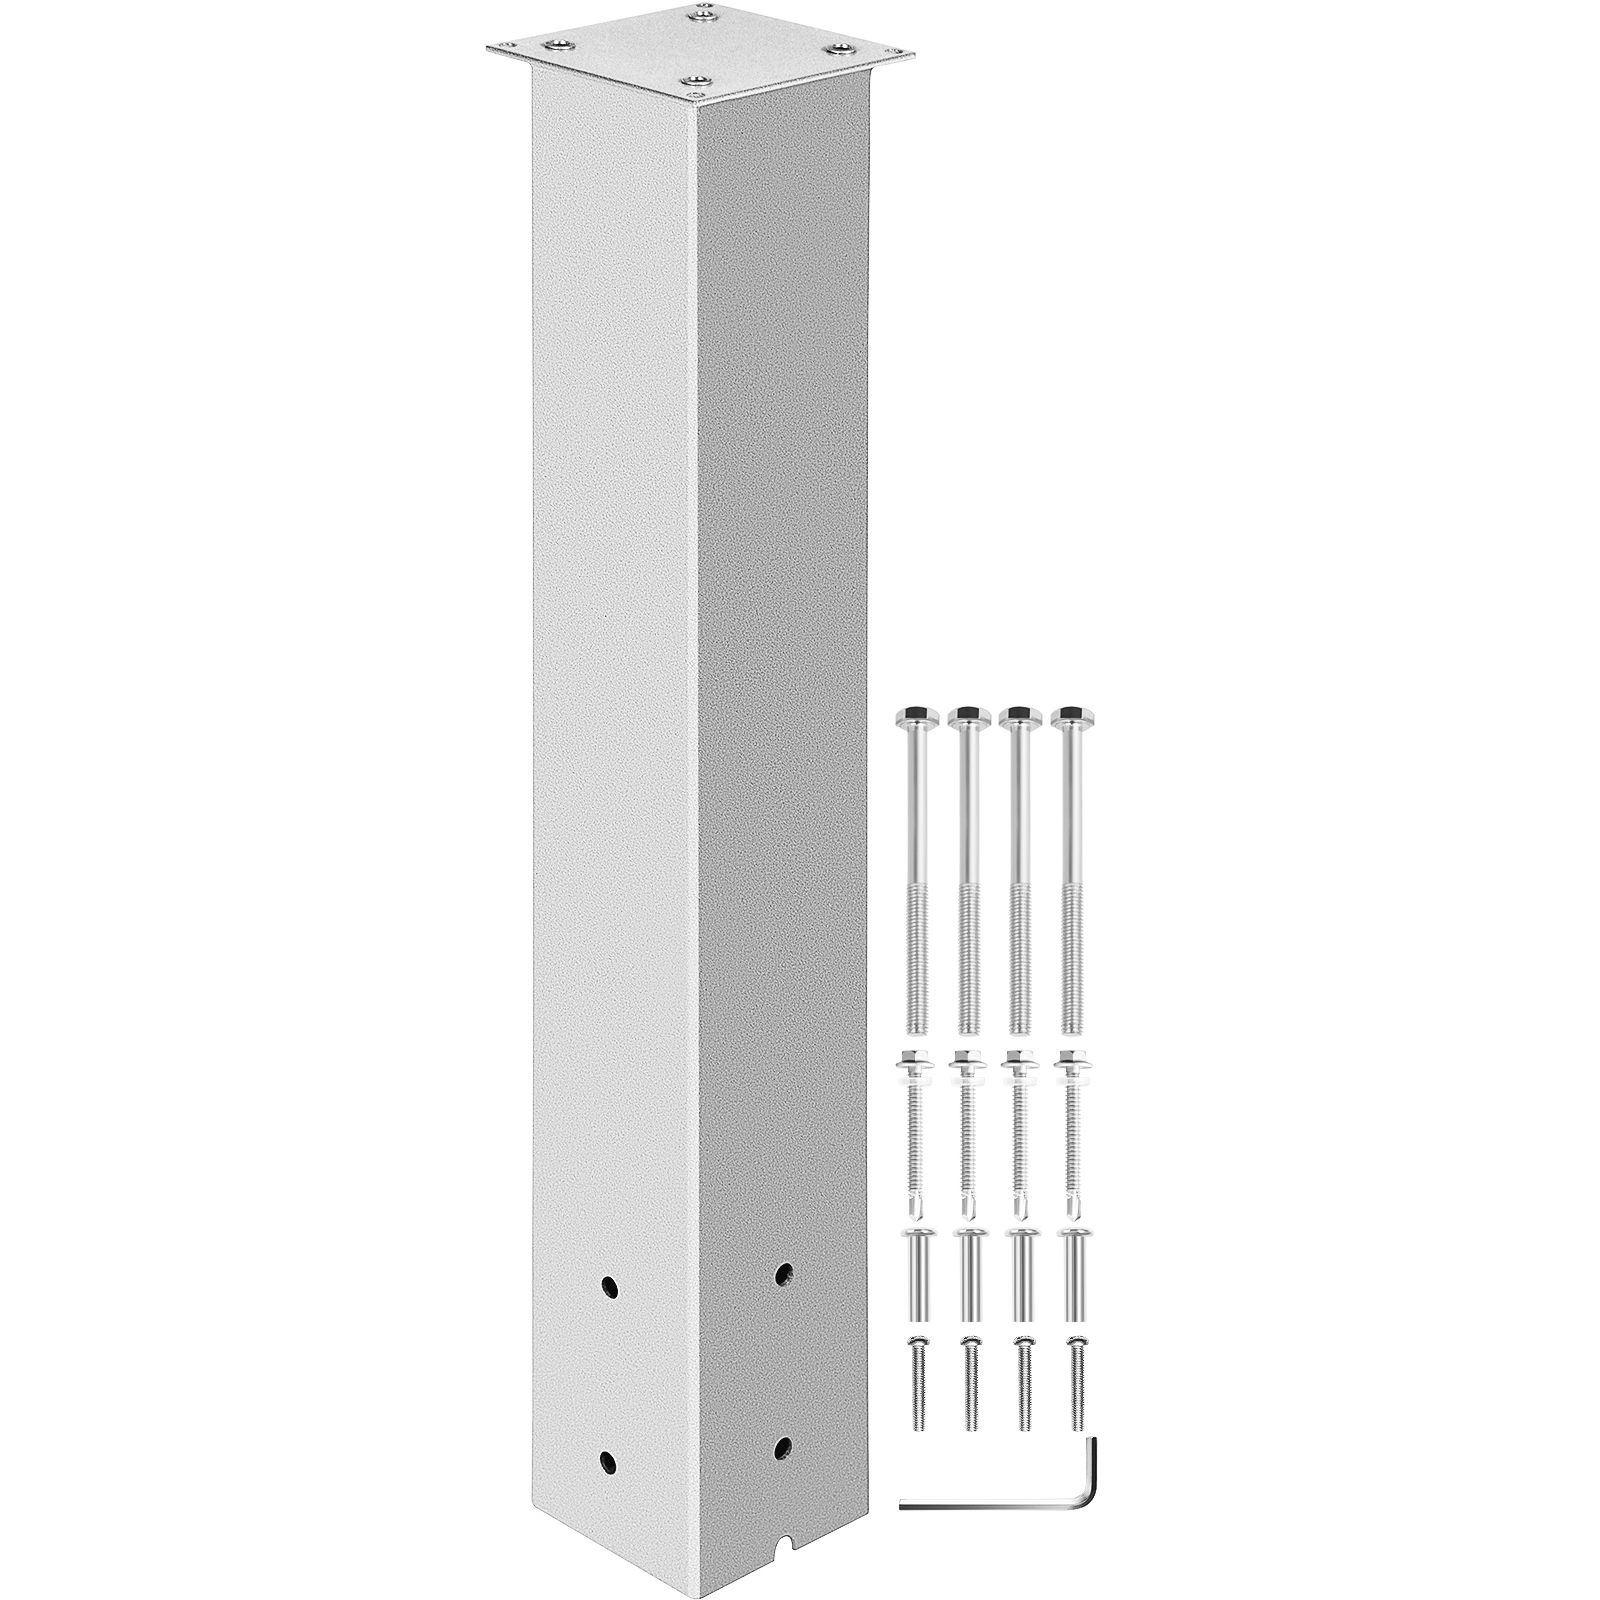 Vevor Mailbox Post, 27" High Mailbox Stand, White Powder-coated Mail Box Post Kit, Q235 Steel Post Stand Surface Mount Post For Sidewalk And Street Curbside, Universal Mail Post For Outdoor Mailbox от Vevor Many GEOs